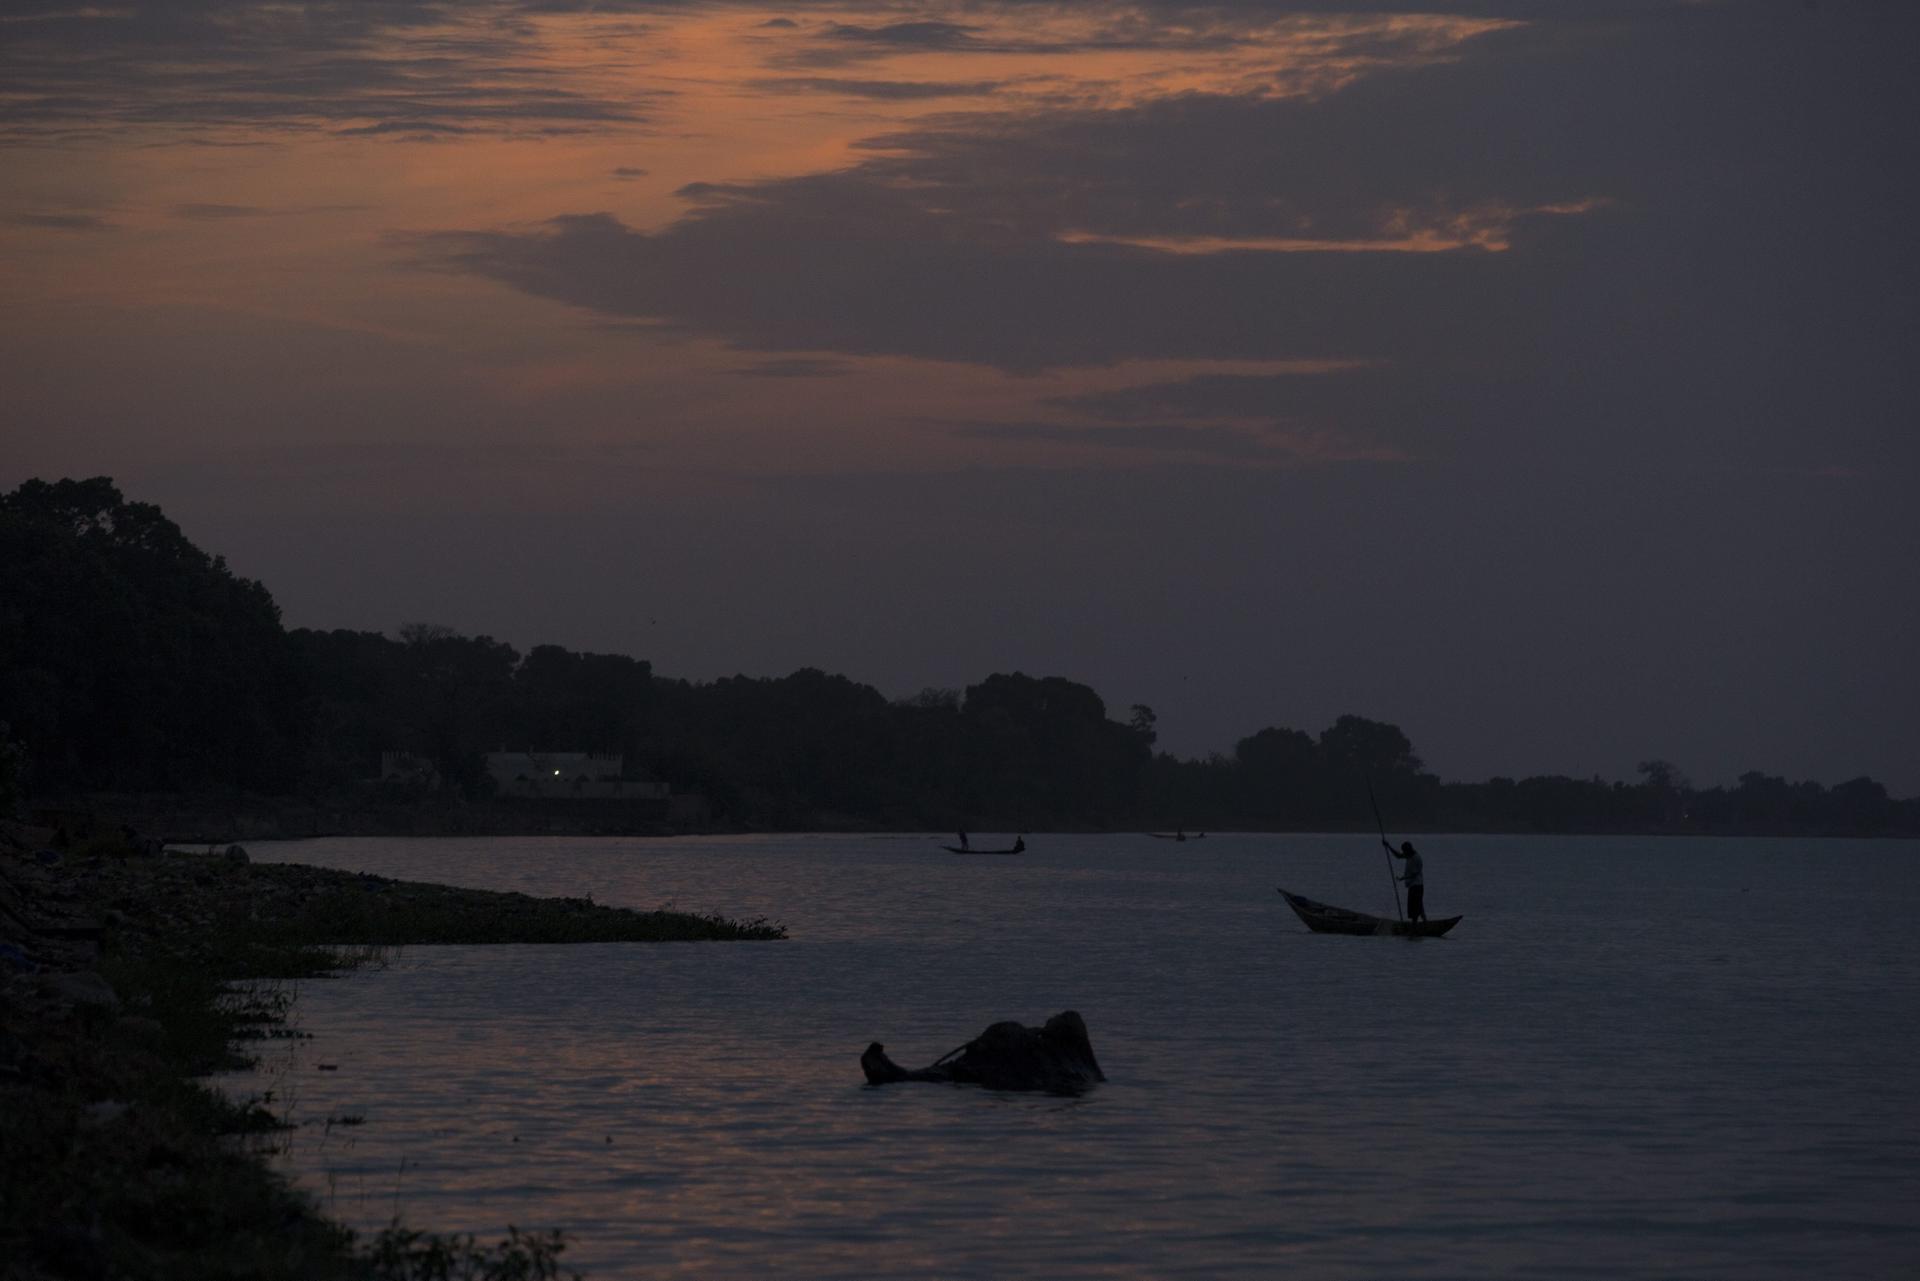 A file picture shows fishermen on the Niger river in Segou, Mali. EPA/EFE/FILE/NIC BOTHMA